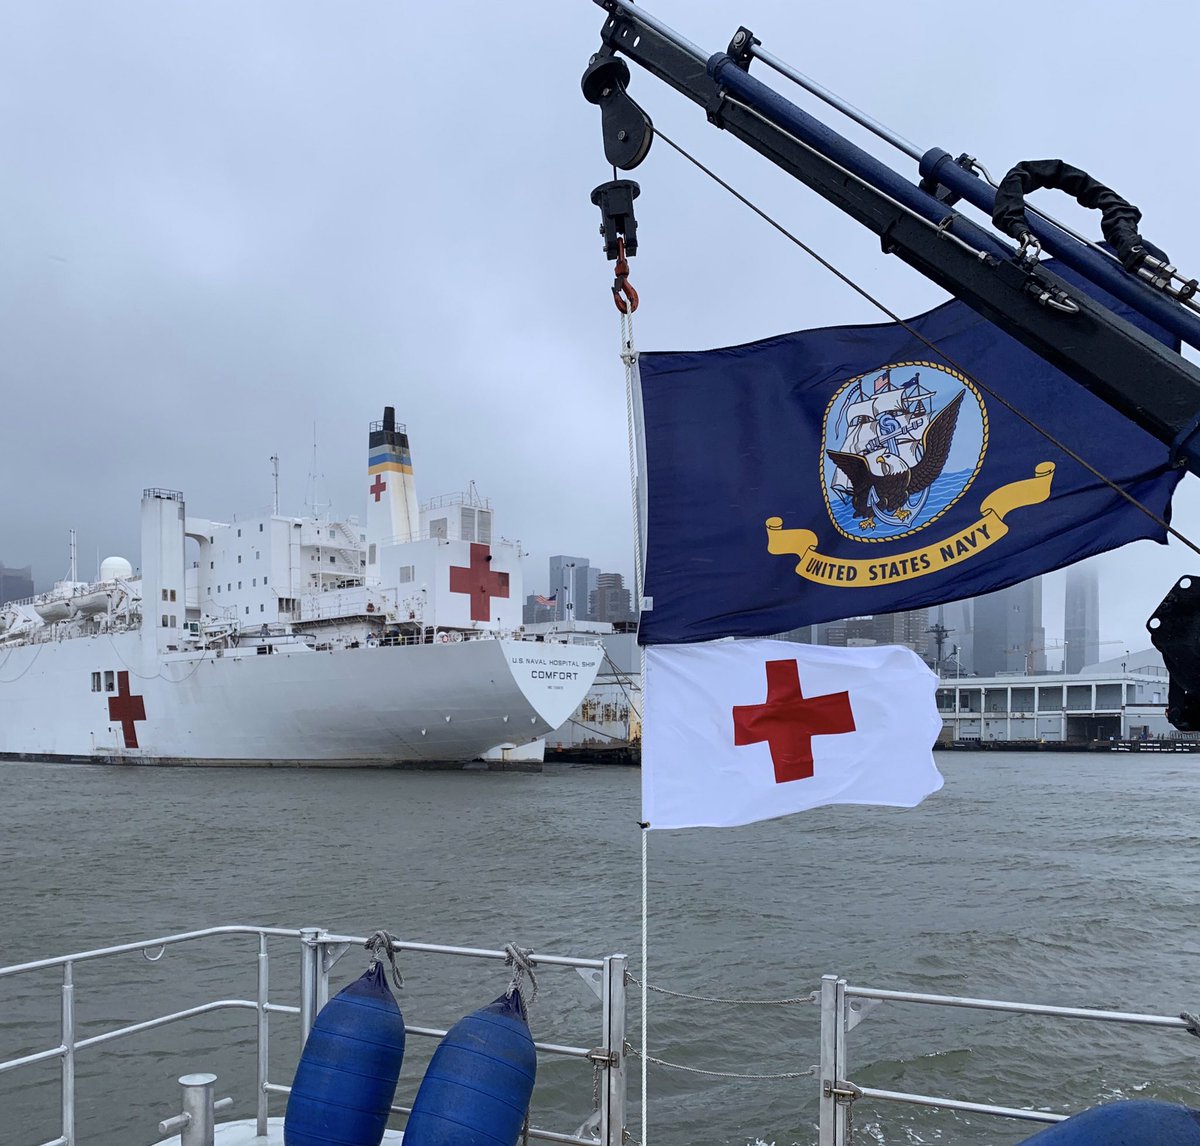 The #NYPD Harbor Unit proudly flies the @USNavy flag while escorting the #USNSComfort down the Hudson River